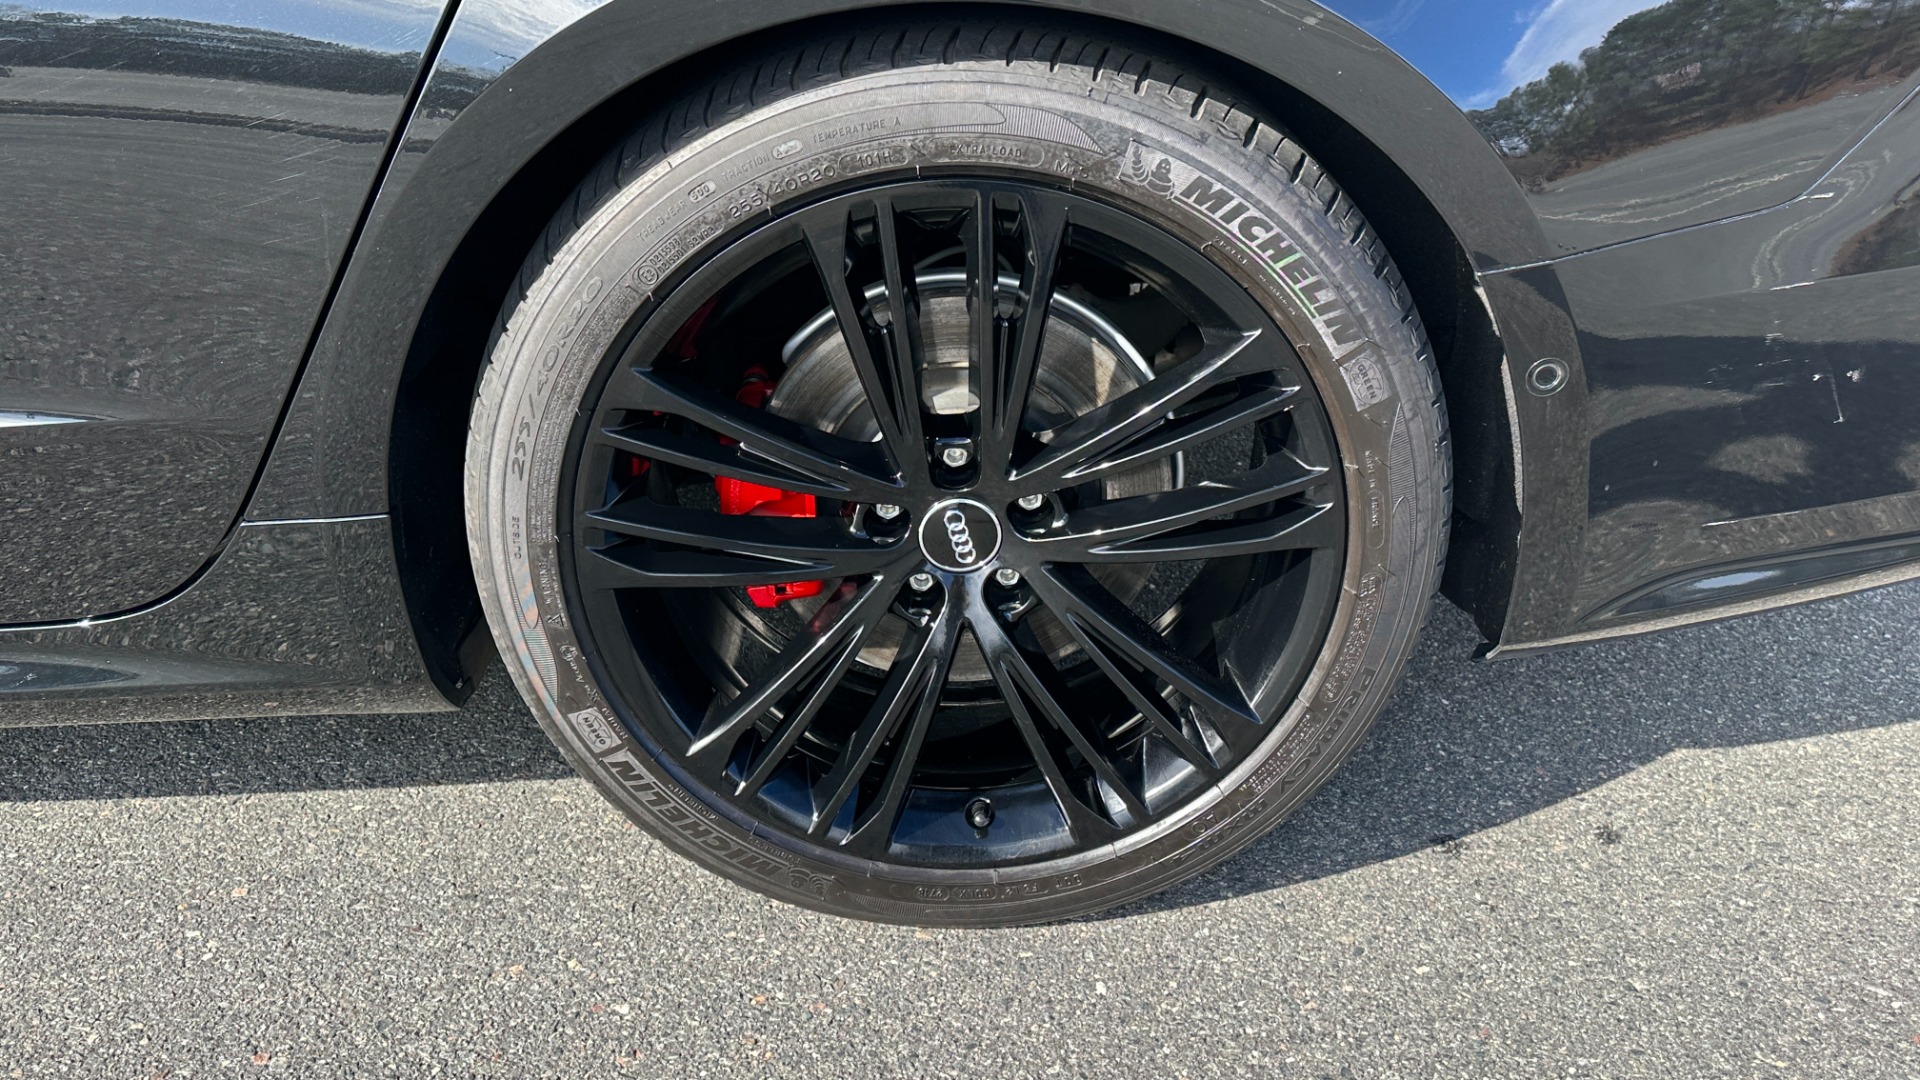 Used 2019 Audi A7 PREMIUM PLUS / S-LINE / 20IN GLOSS BLACK WHEELS / COLD WEATHER PKG / RED CA for sale $53,995 at Formula Imports in Charlotte NC 28227 42